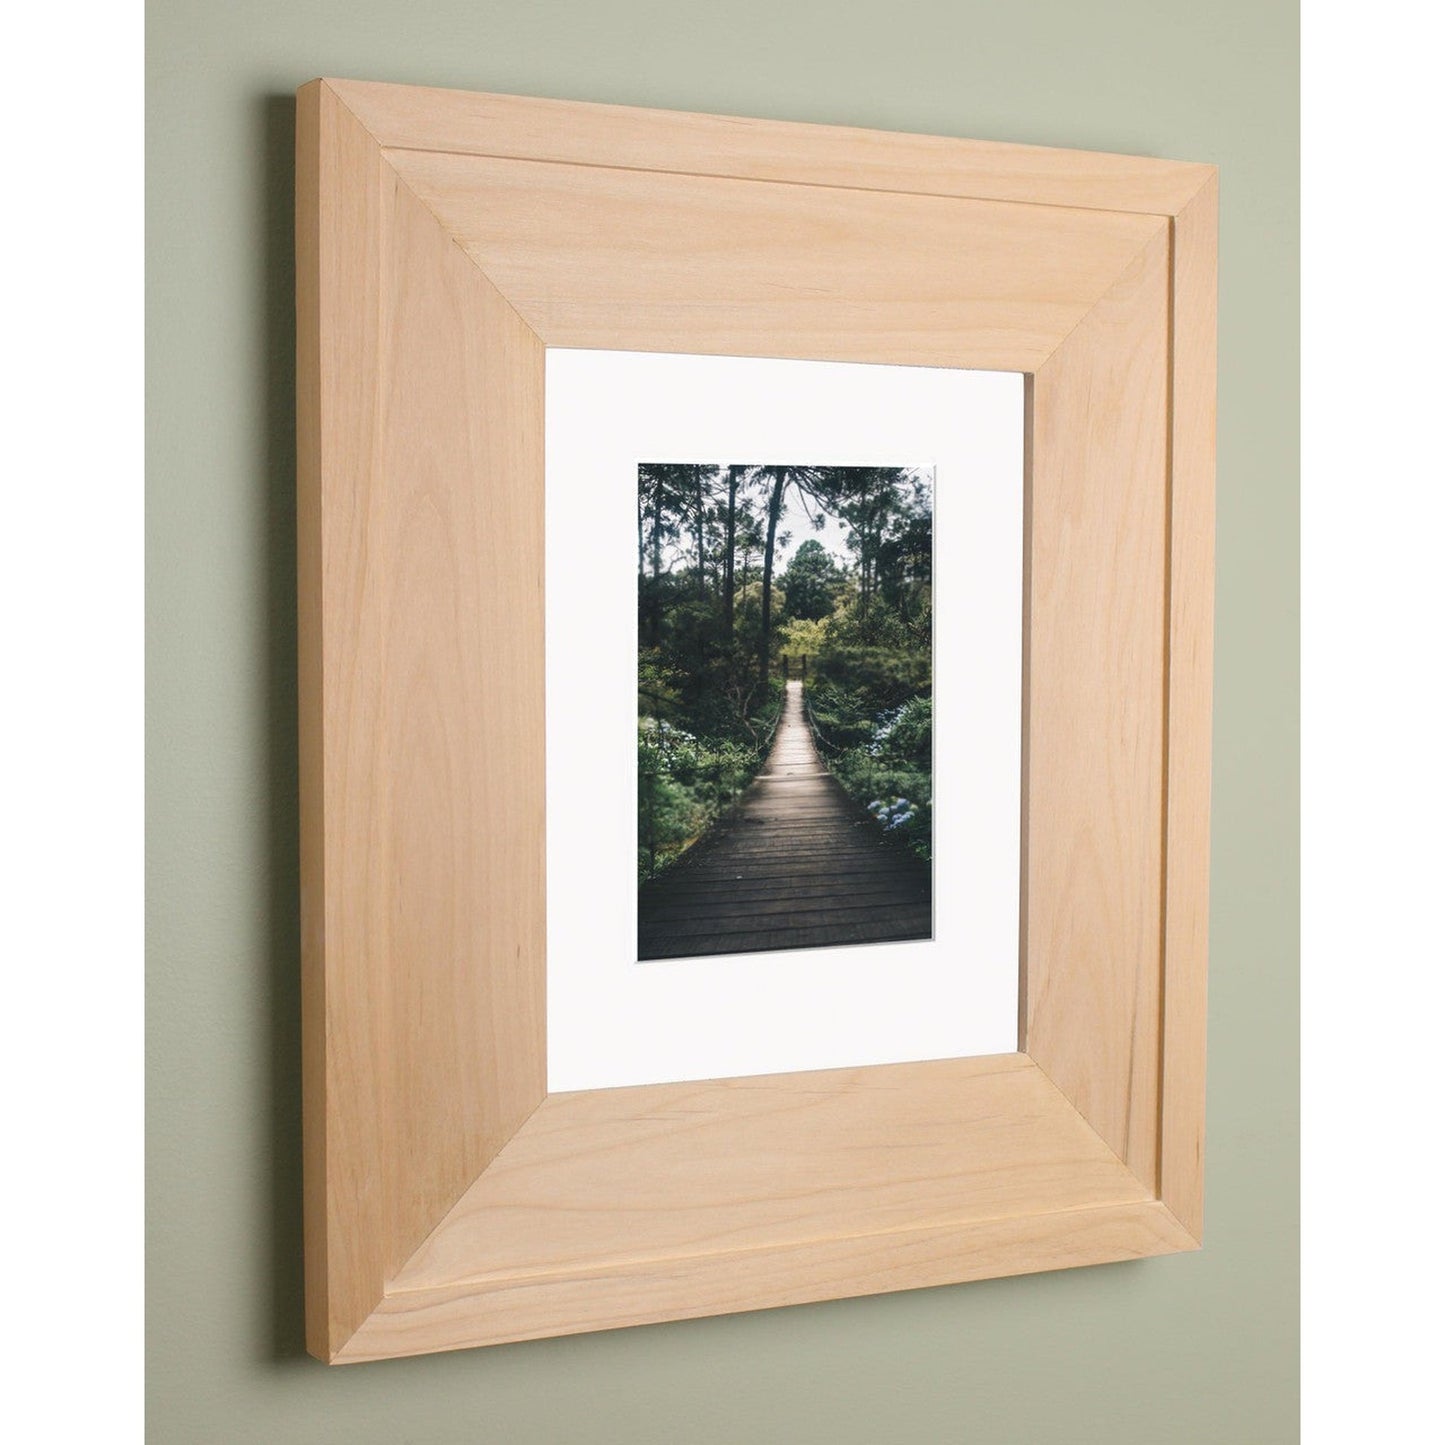 Fox Hollow Furnishings 11" x 14" Unfinished Raised Edge Compact Portrait Special 3" Depth Recessed Picture Frame Medicine Cabinet With Mirror